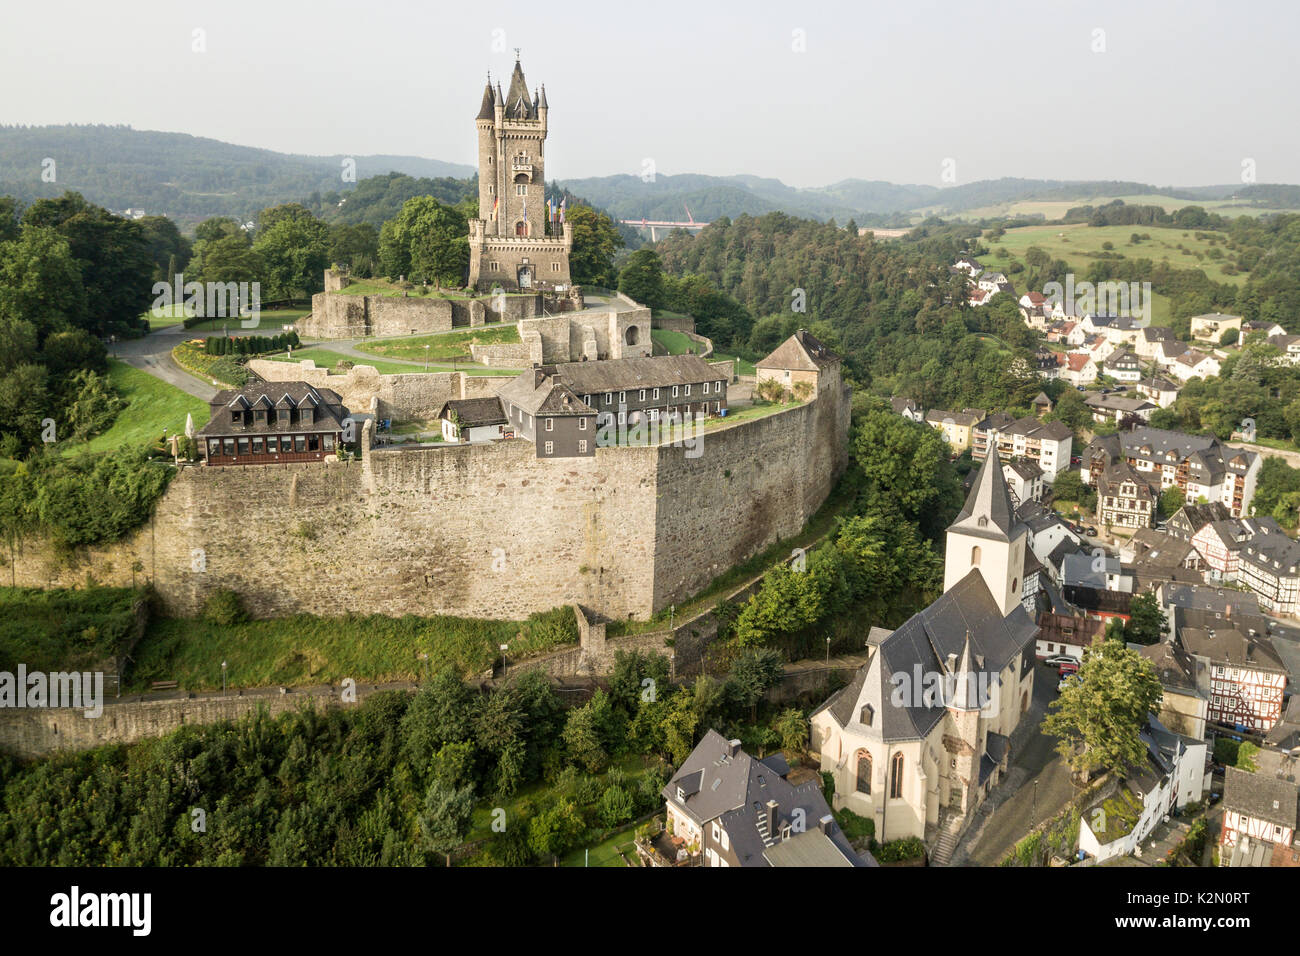 Ancient castle of Dillenburg. Hesse, Germany Stock Photo